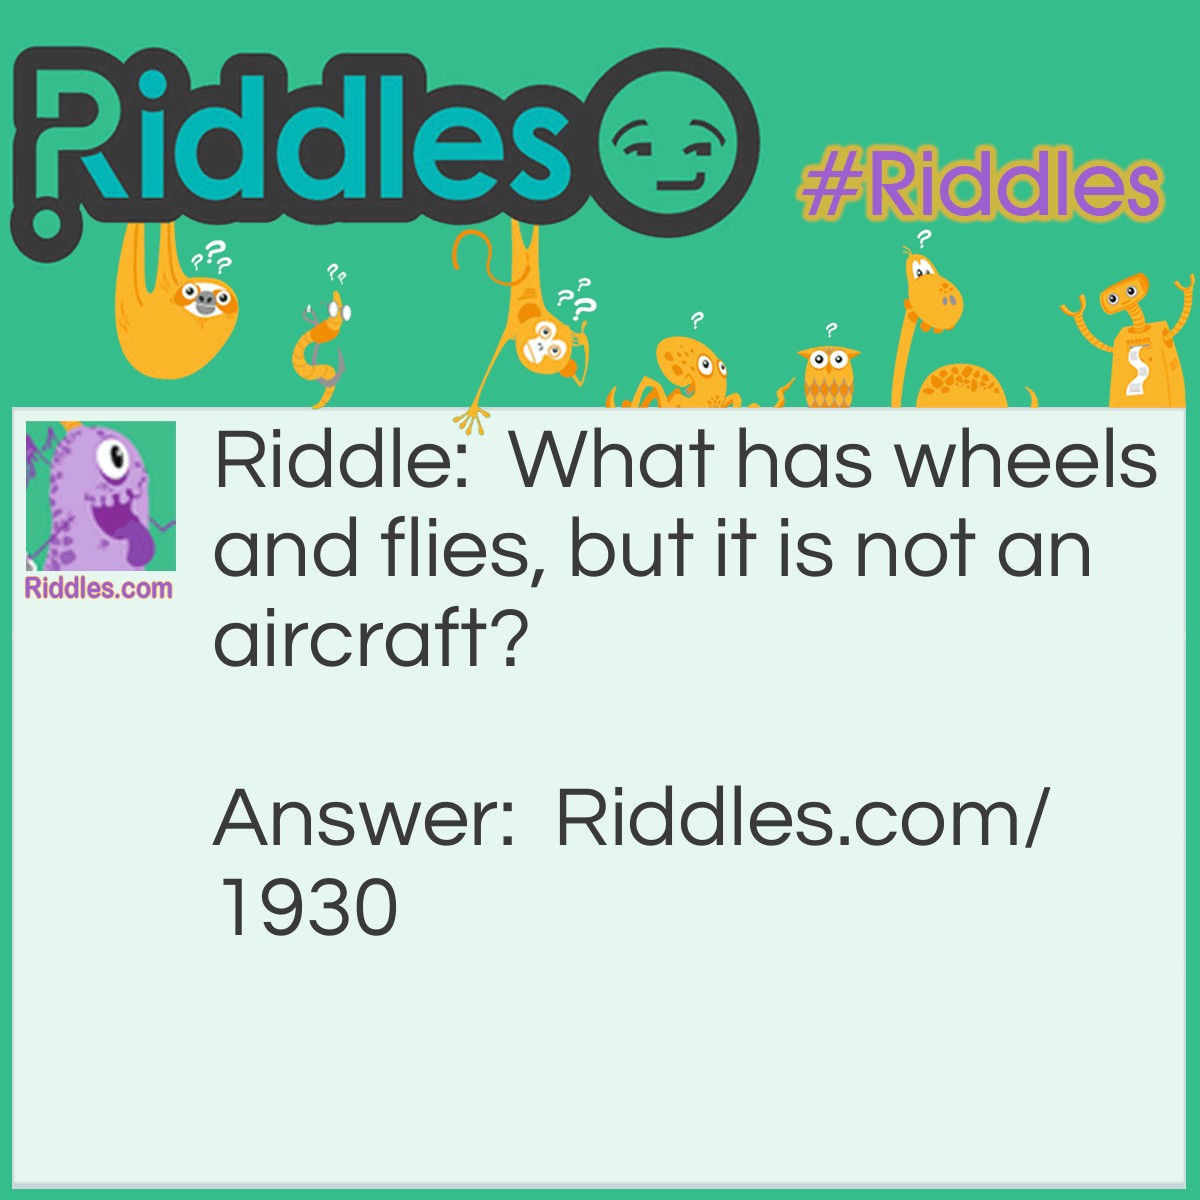 Riddle: What has wheels and flies, but it is not an aircraft? Answer: A garbage truck.